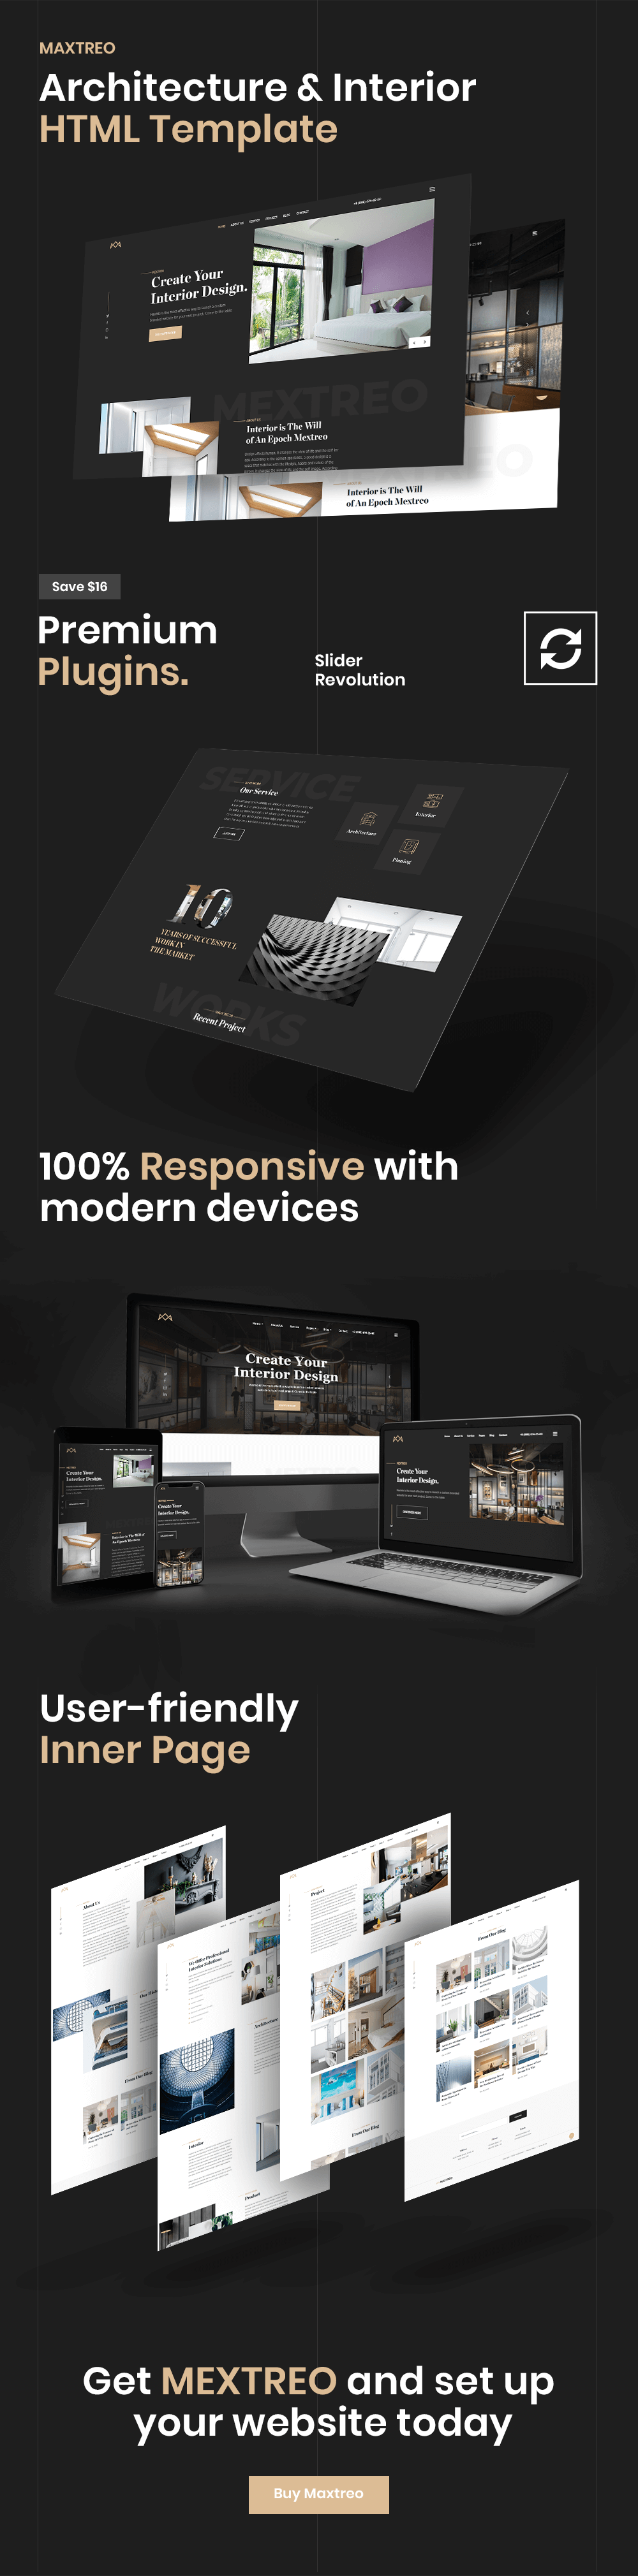 Maxtreo - Architecture and Interior HTML5 Template - 1